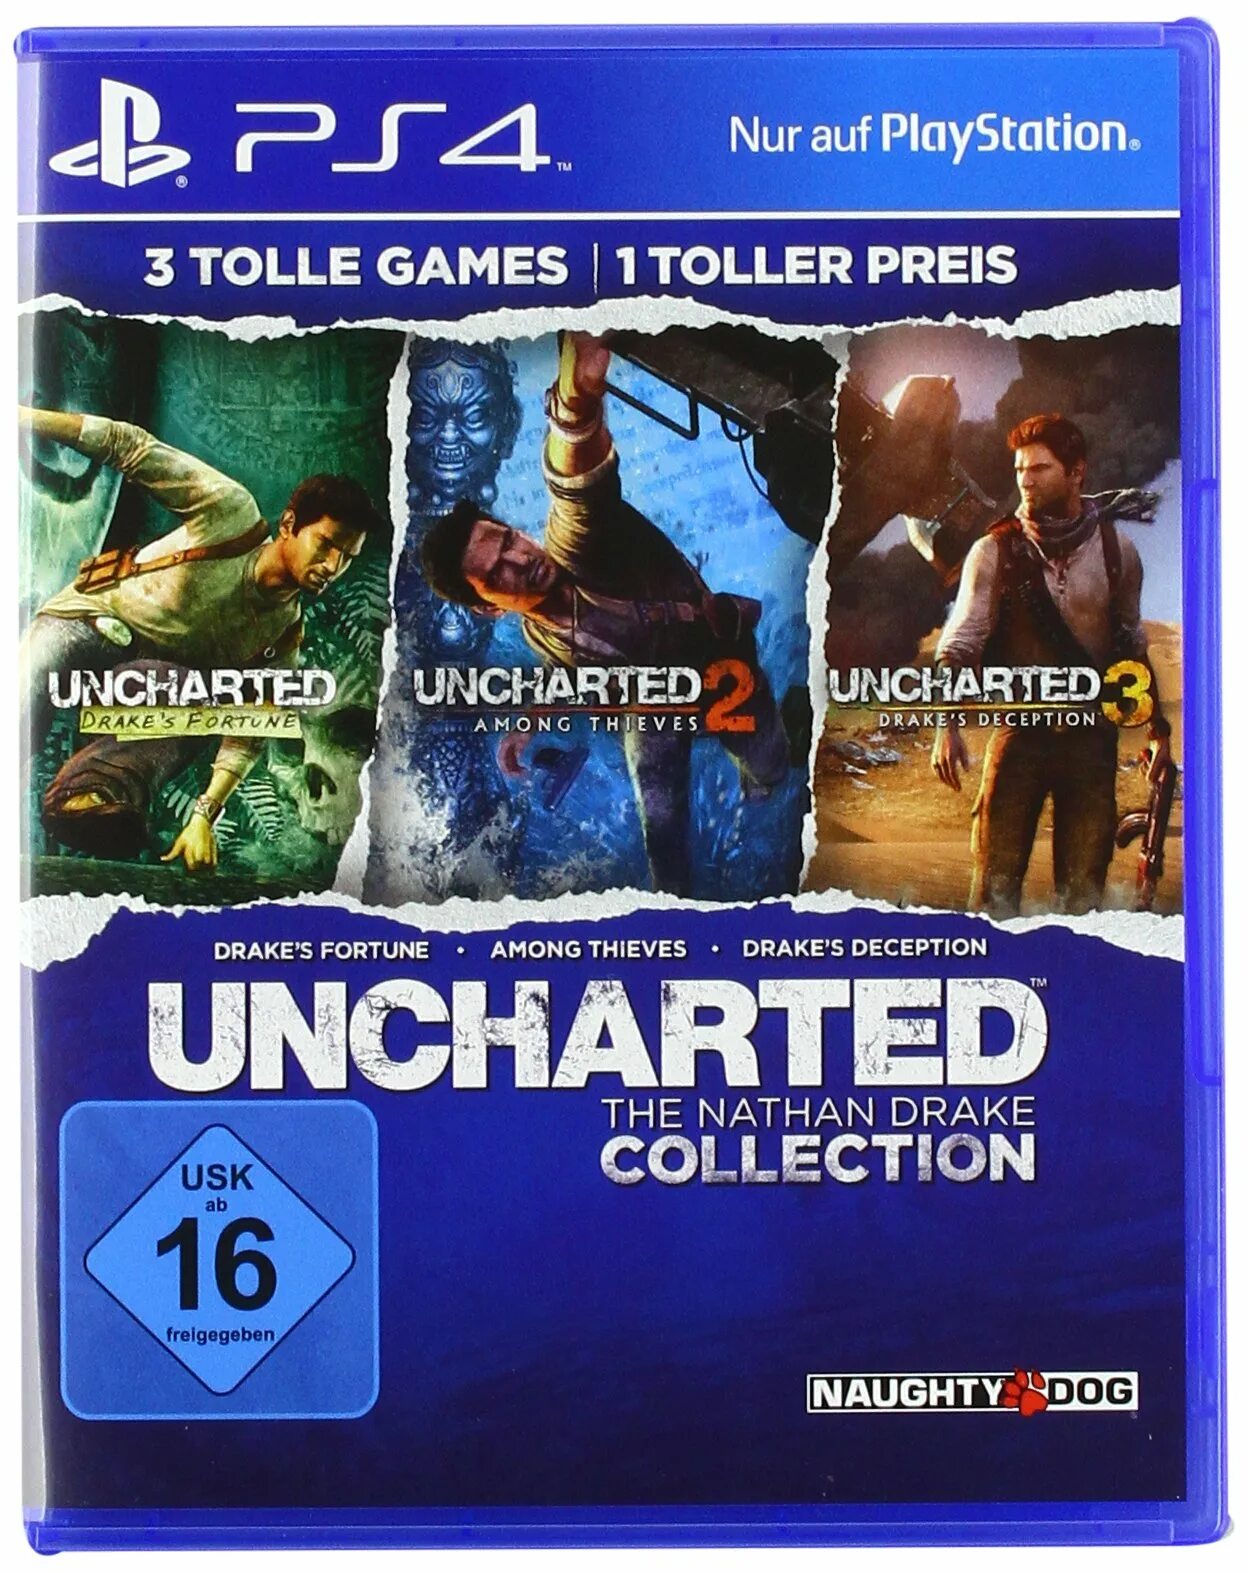 Uncharted ps4 купить. Uncharted Drake's Fortune ps4. Uncharted 2 ps4. Анчартед 1 2 3 на плейстейшен 4.